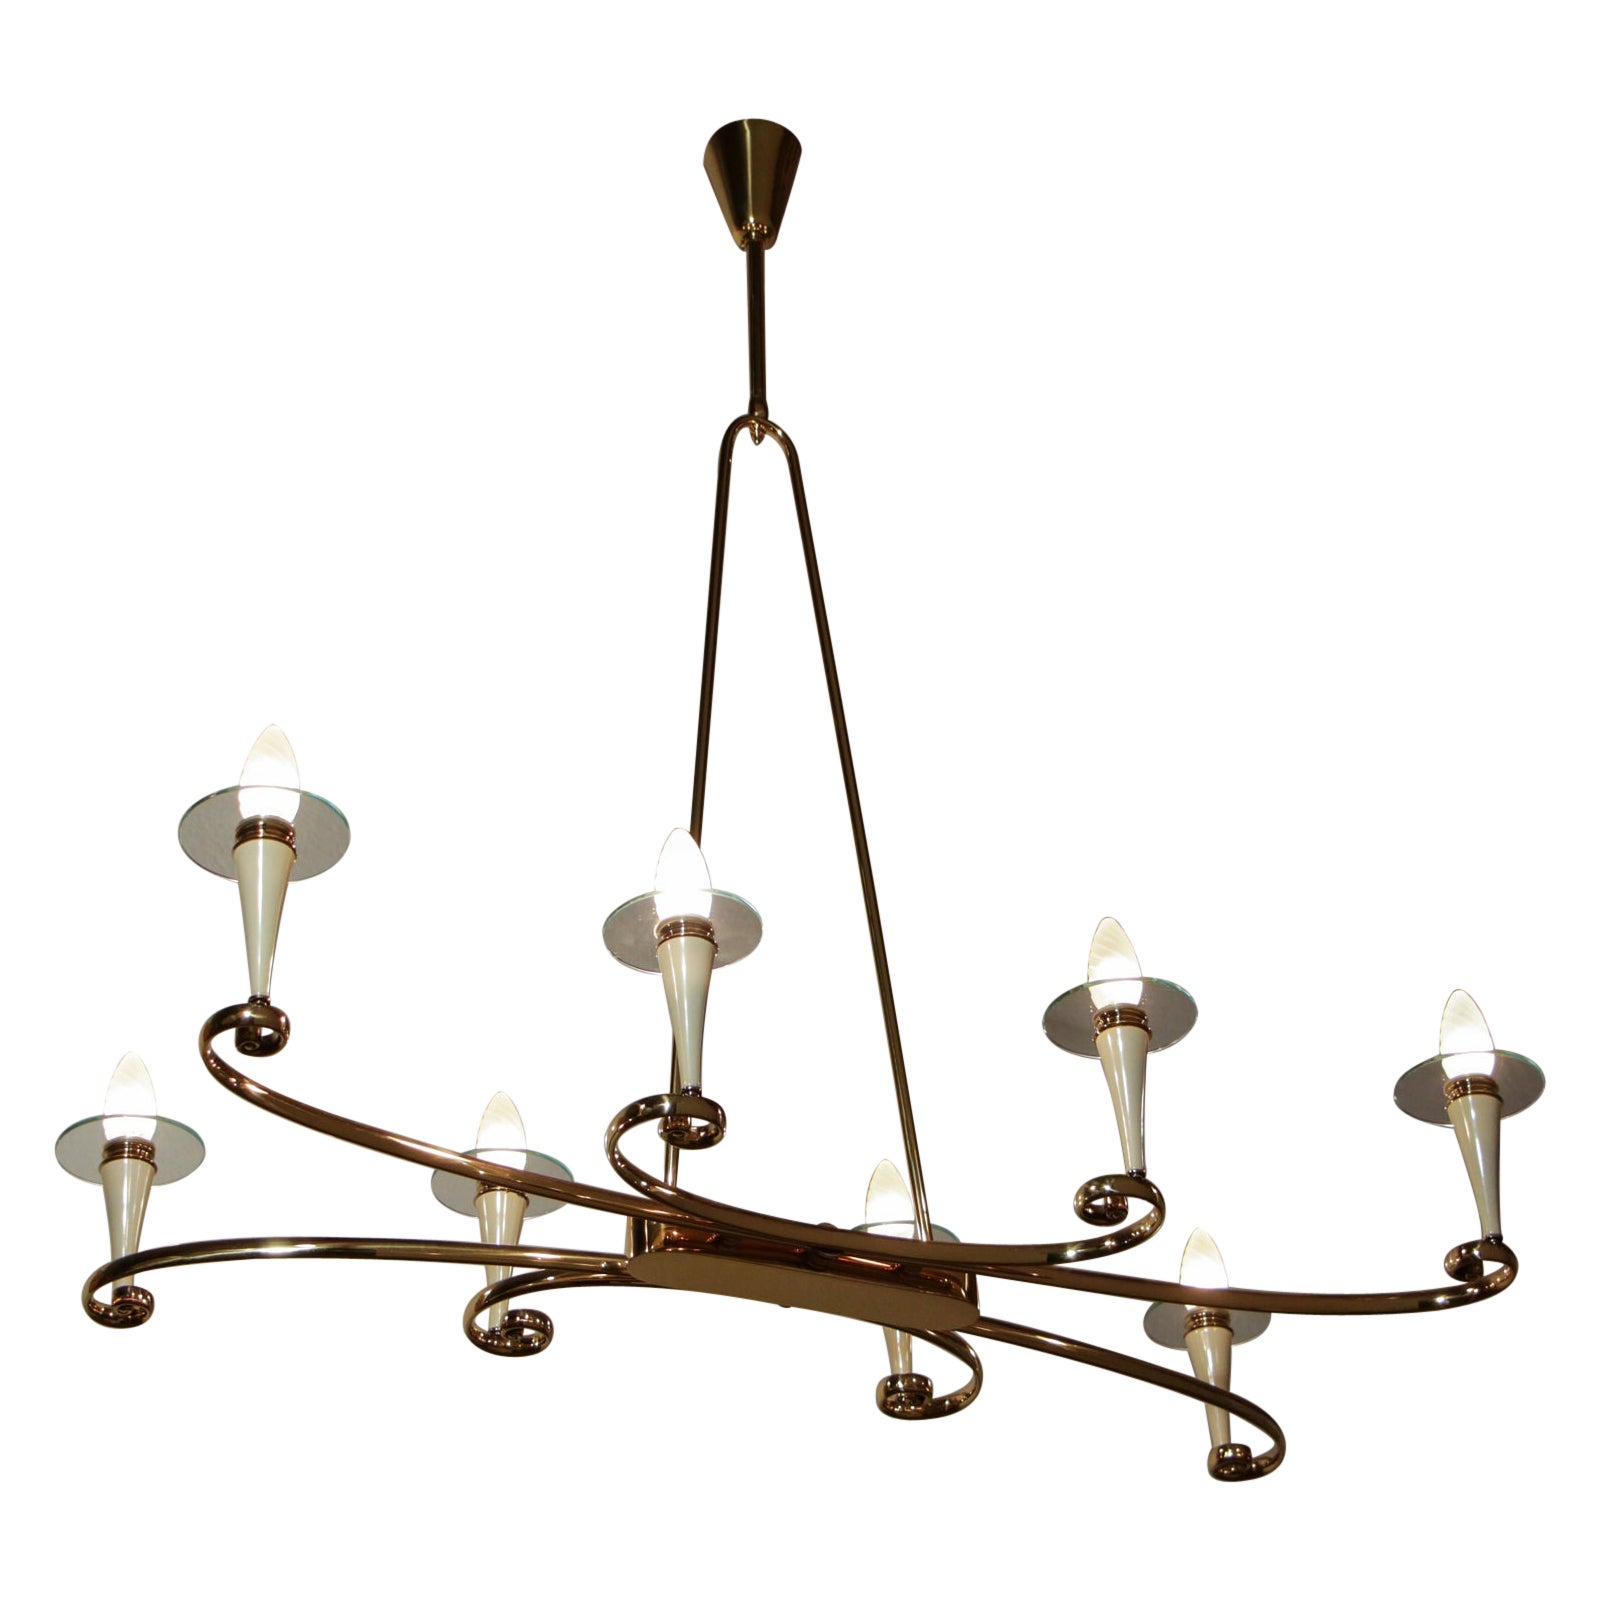 Italian Midcentury Gold and Ivory Color Eight Lights Chandelier, 1950s For Sale